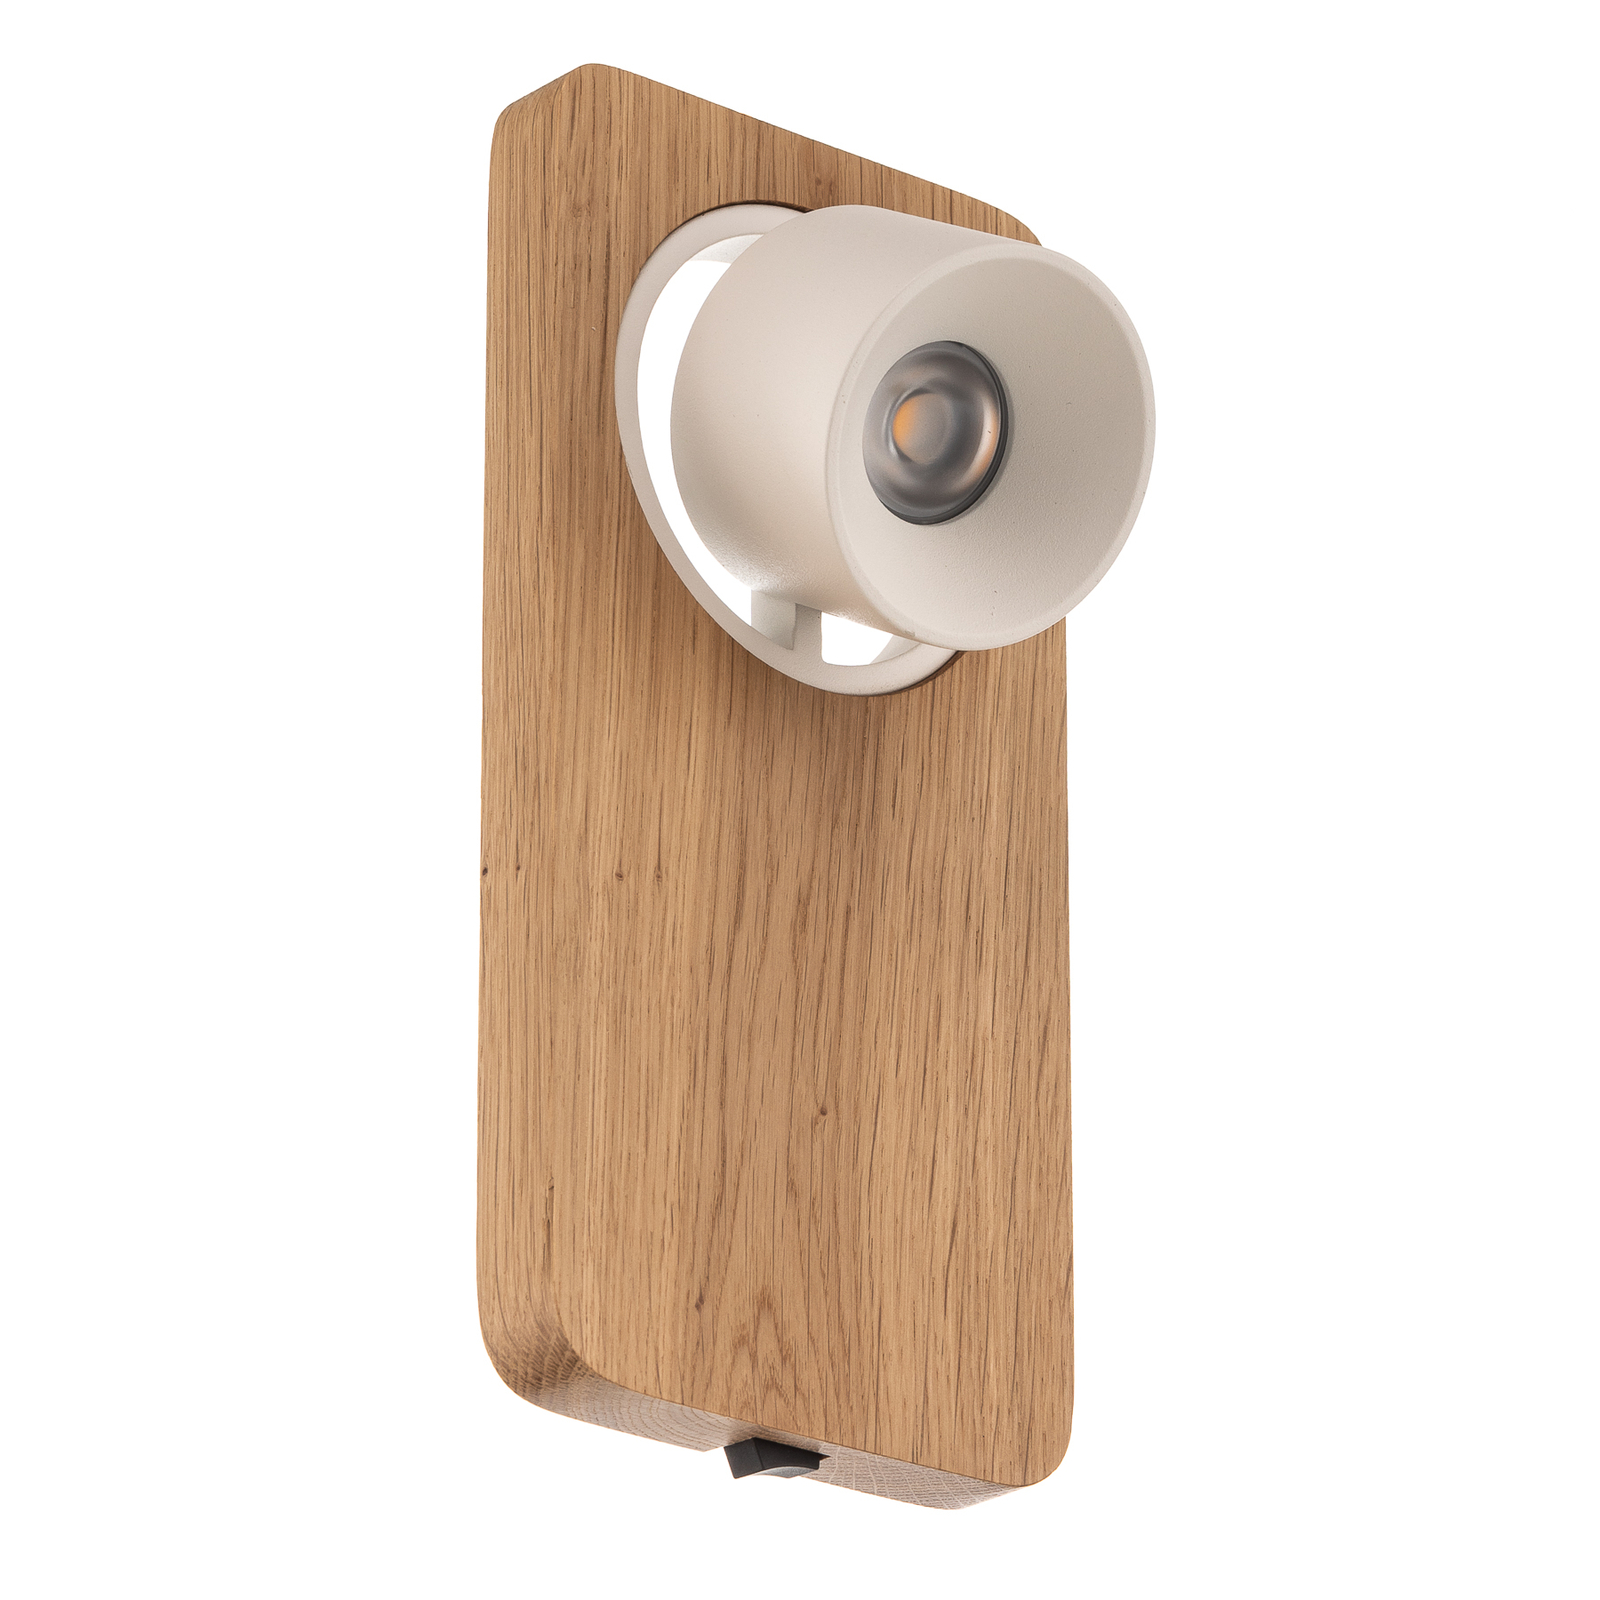 Applique LED Beebo W, rovere